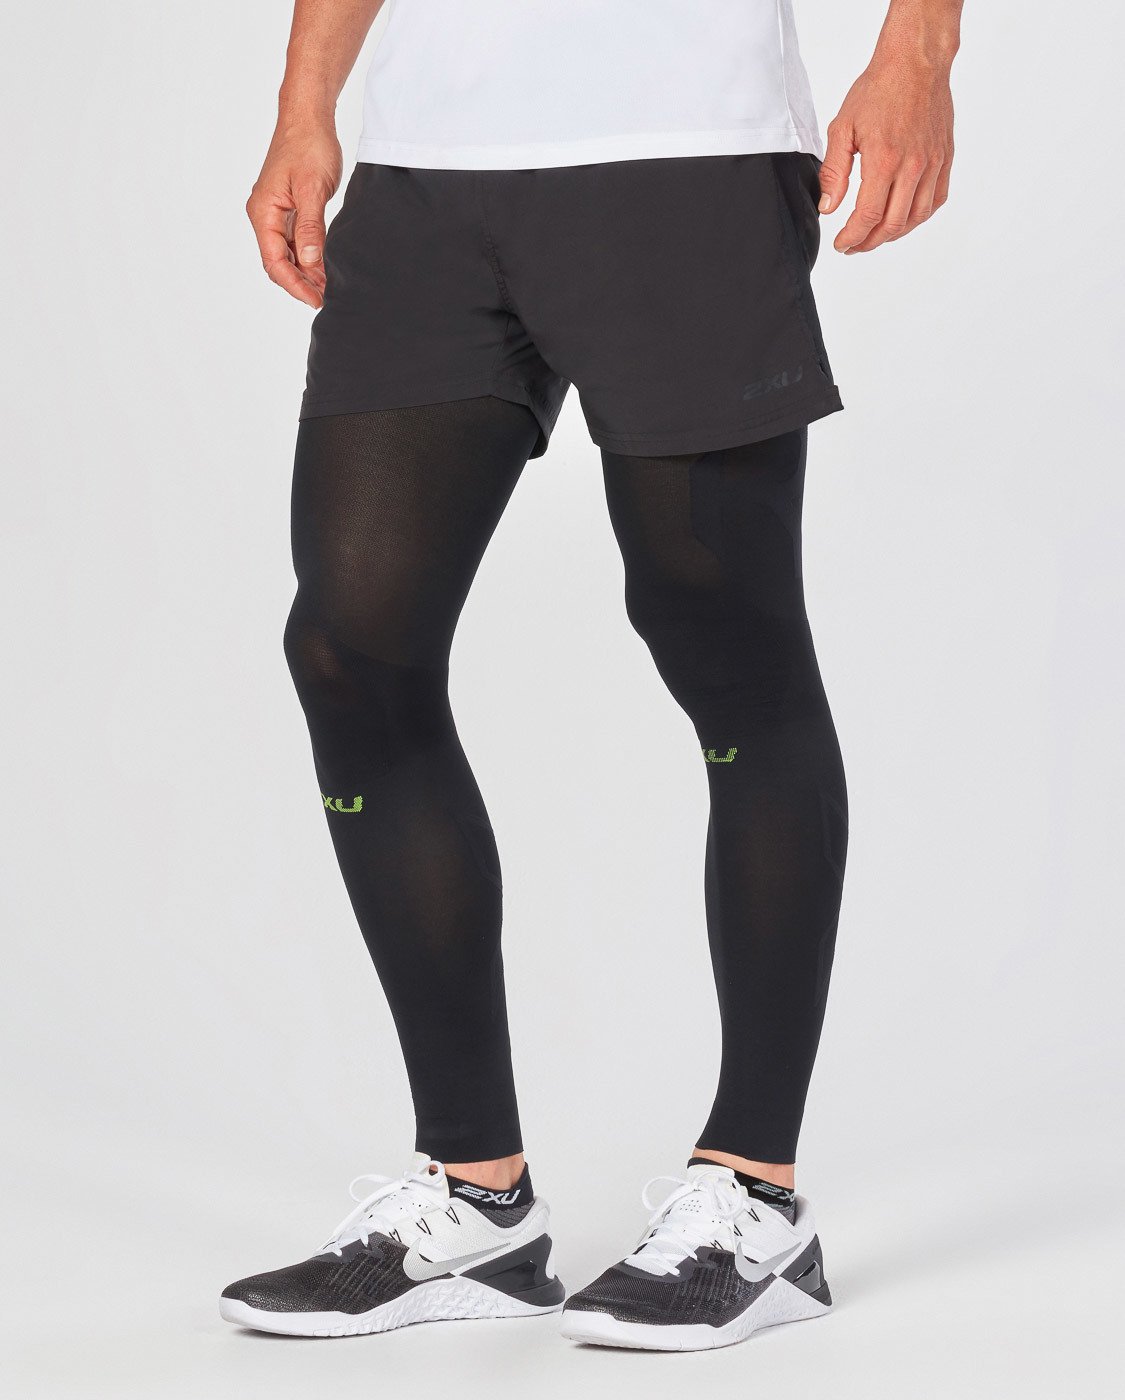 Compression Sleeves for Recovery | 2XU – 2XU